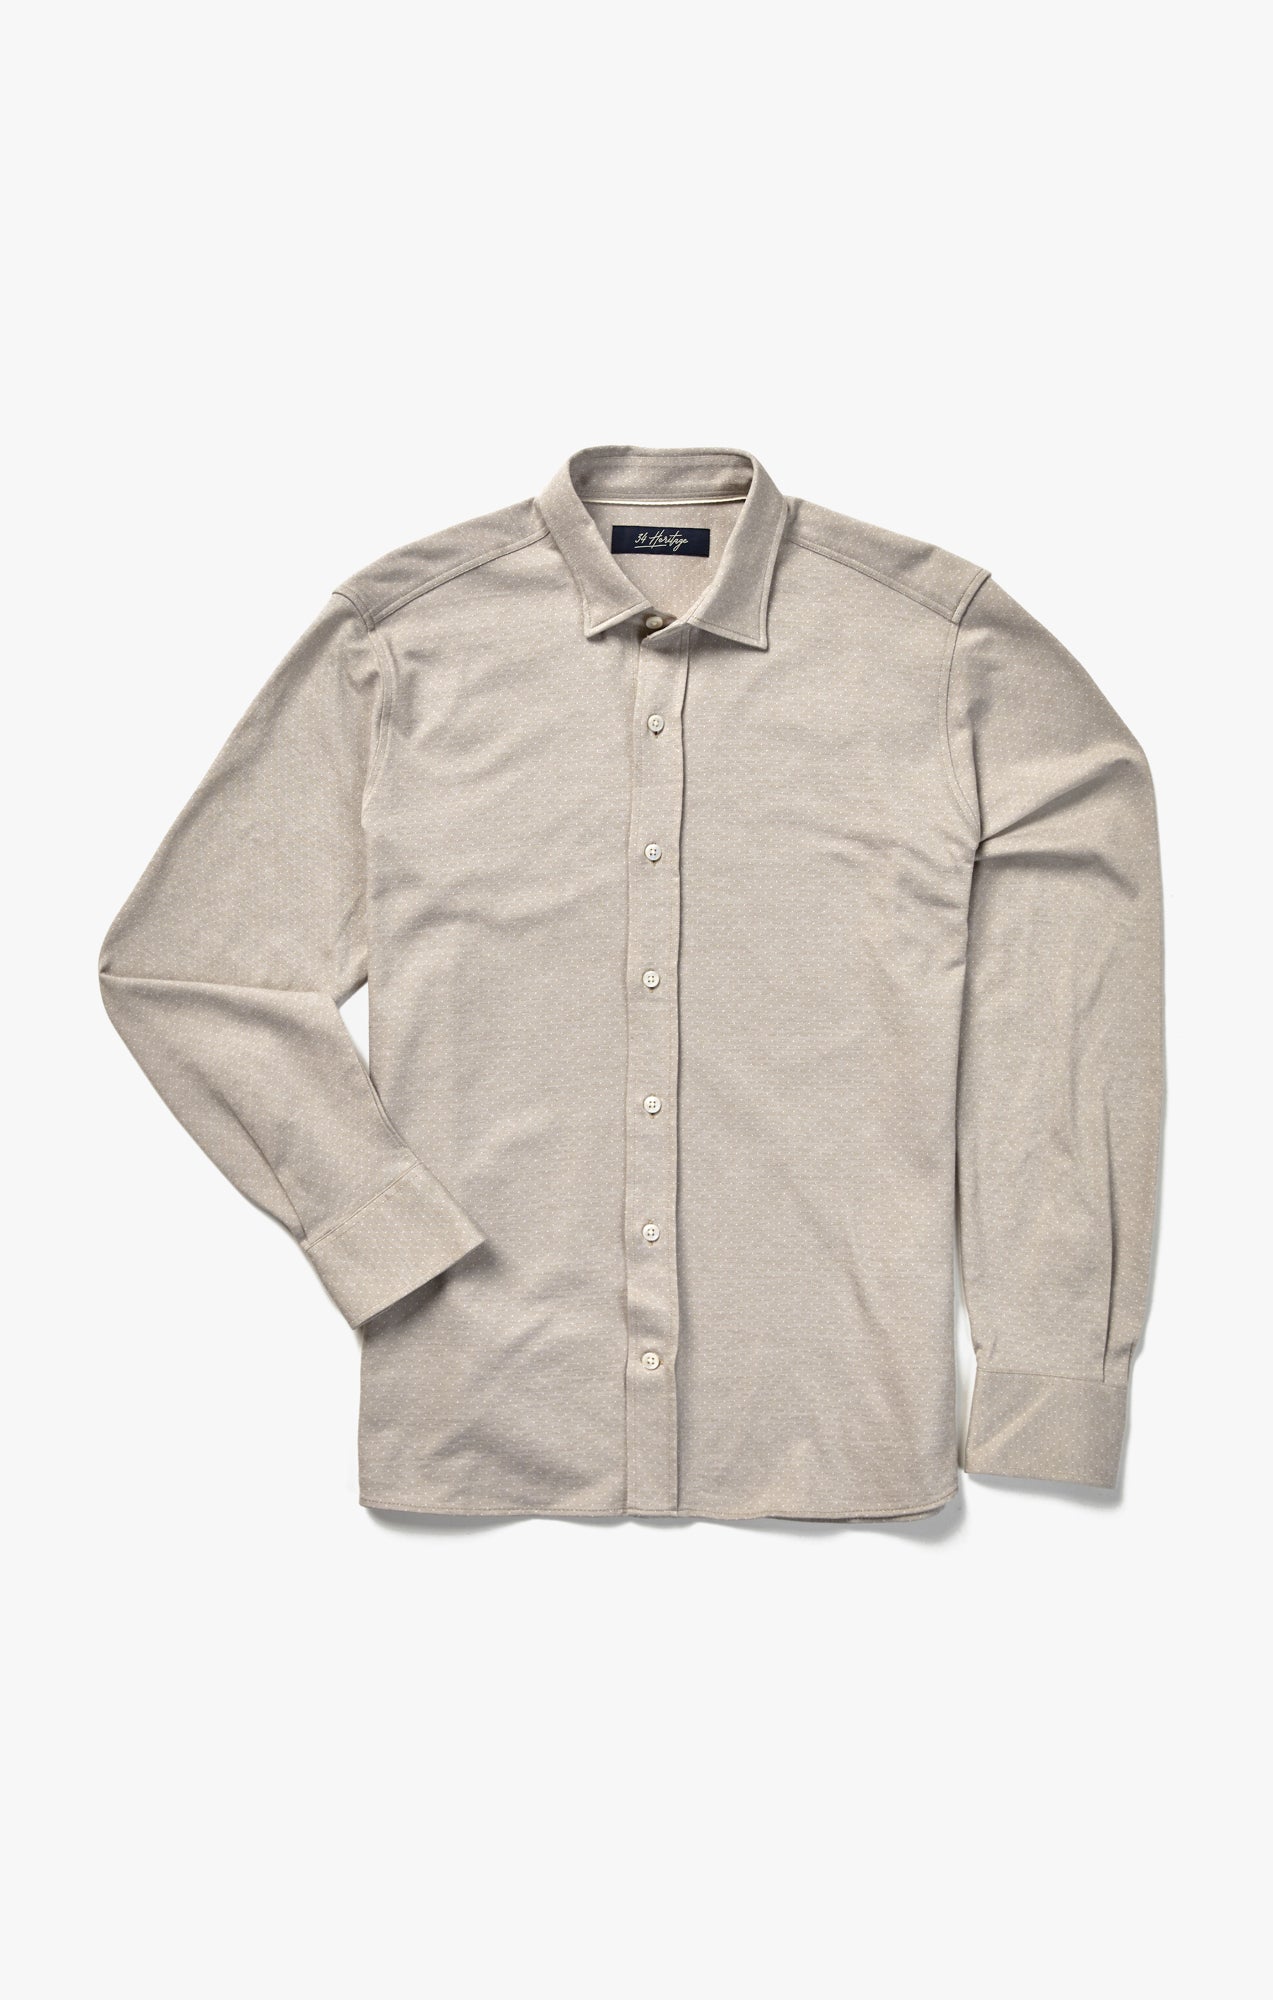 Star Shirt in Simply Taupe Image 9